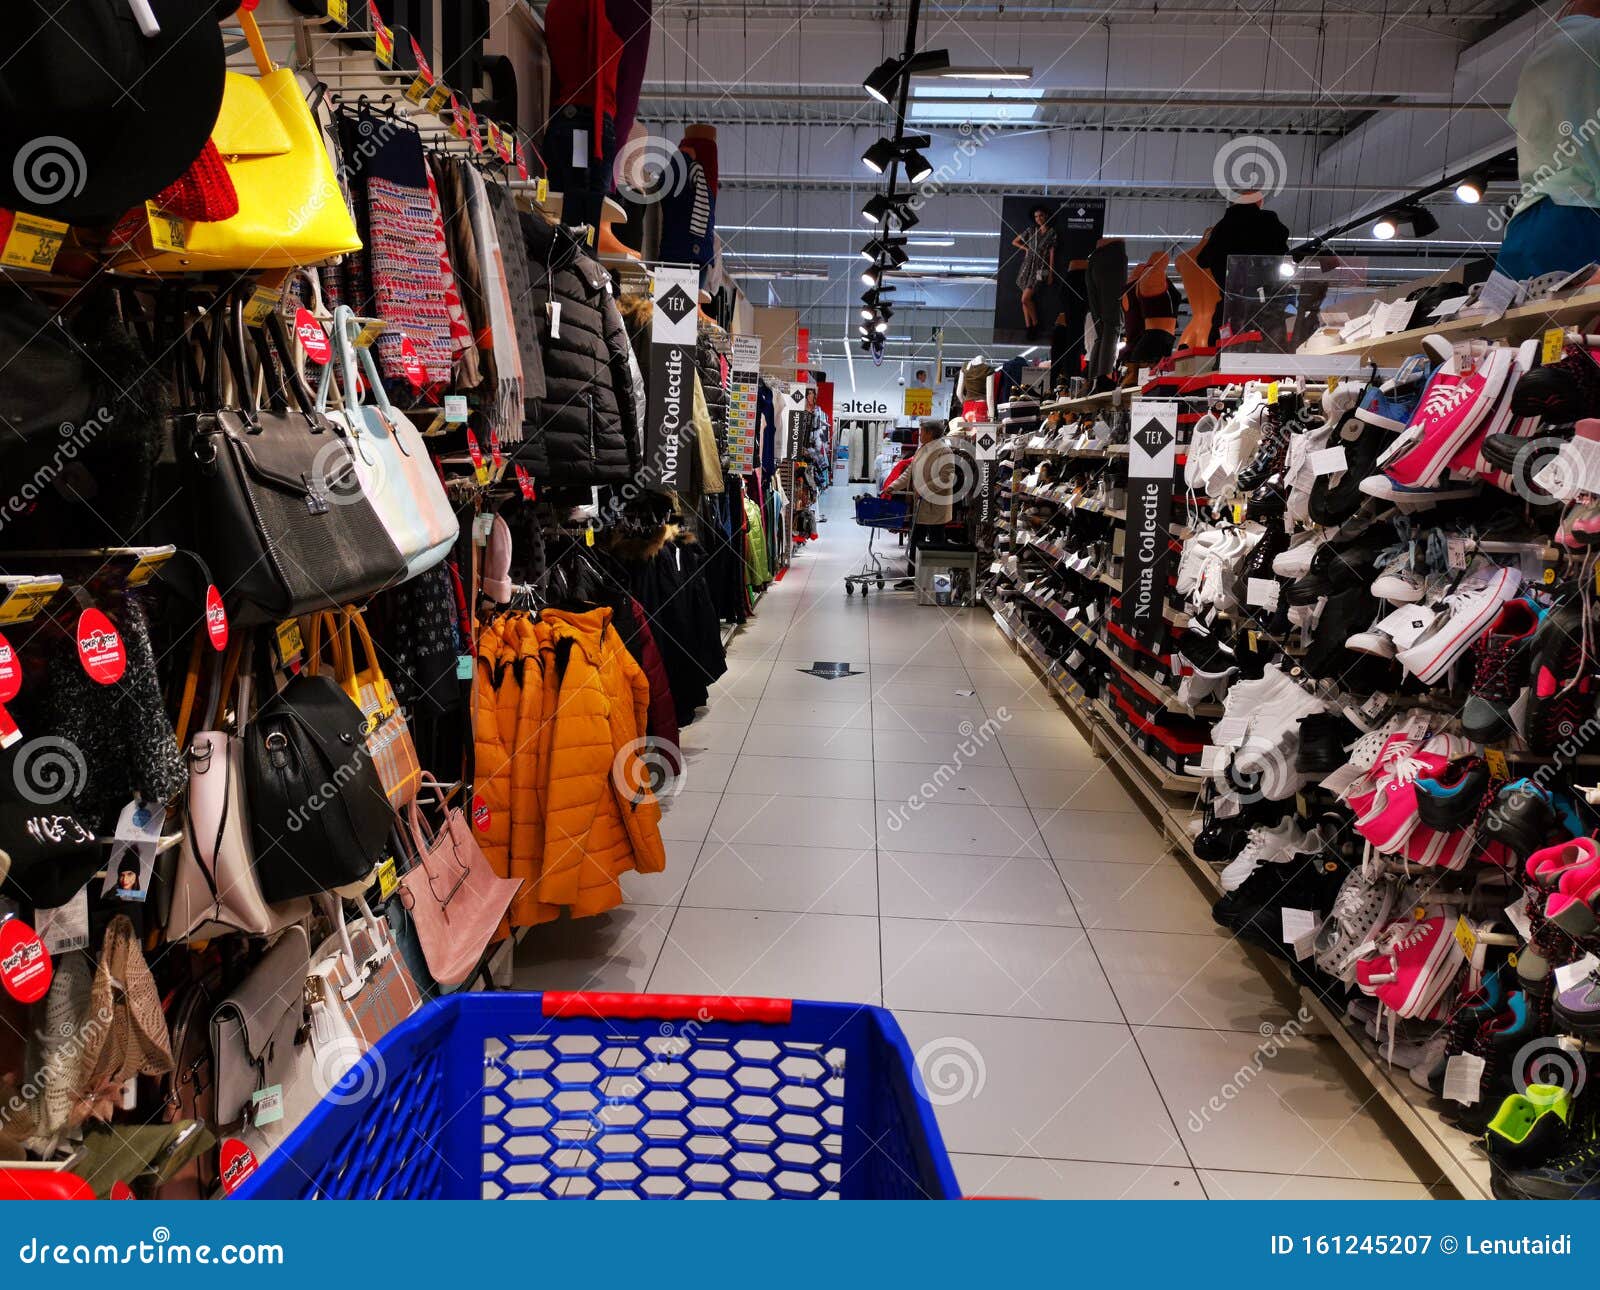 Footwear, Clothing and Accessories at Supermarket Carrefour Editorial ...